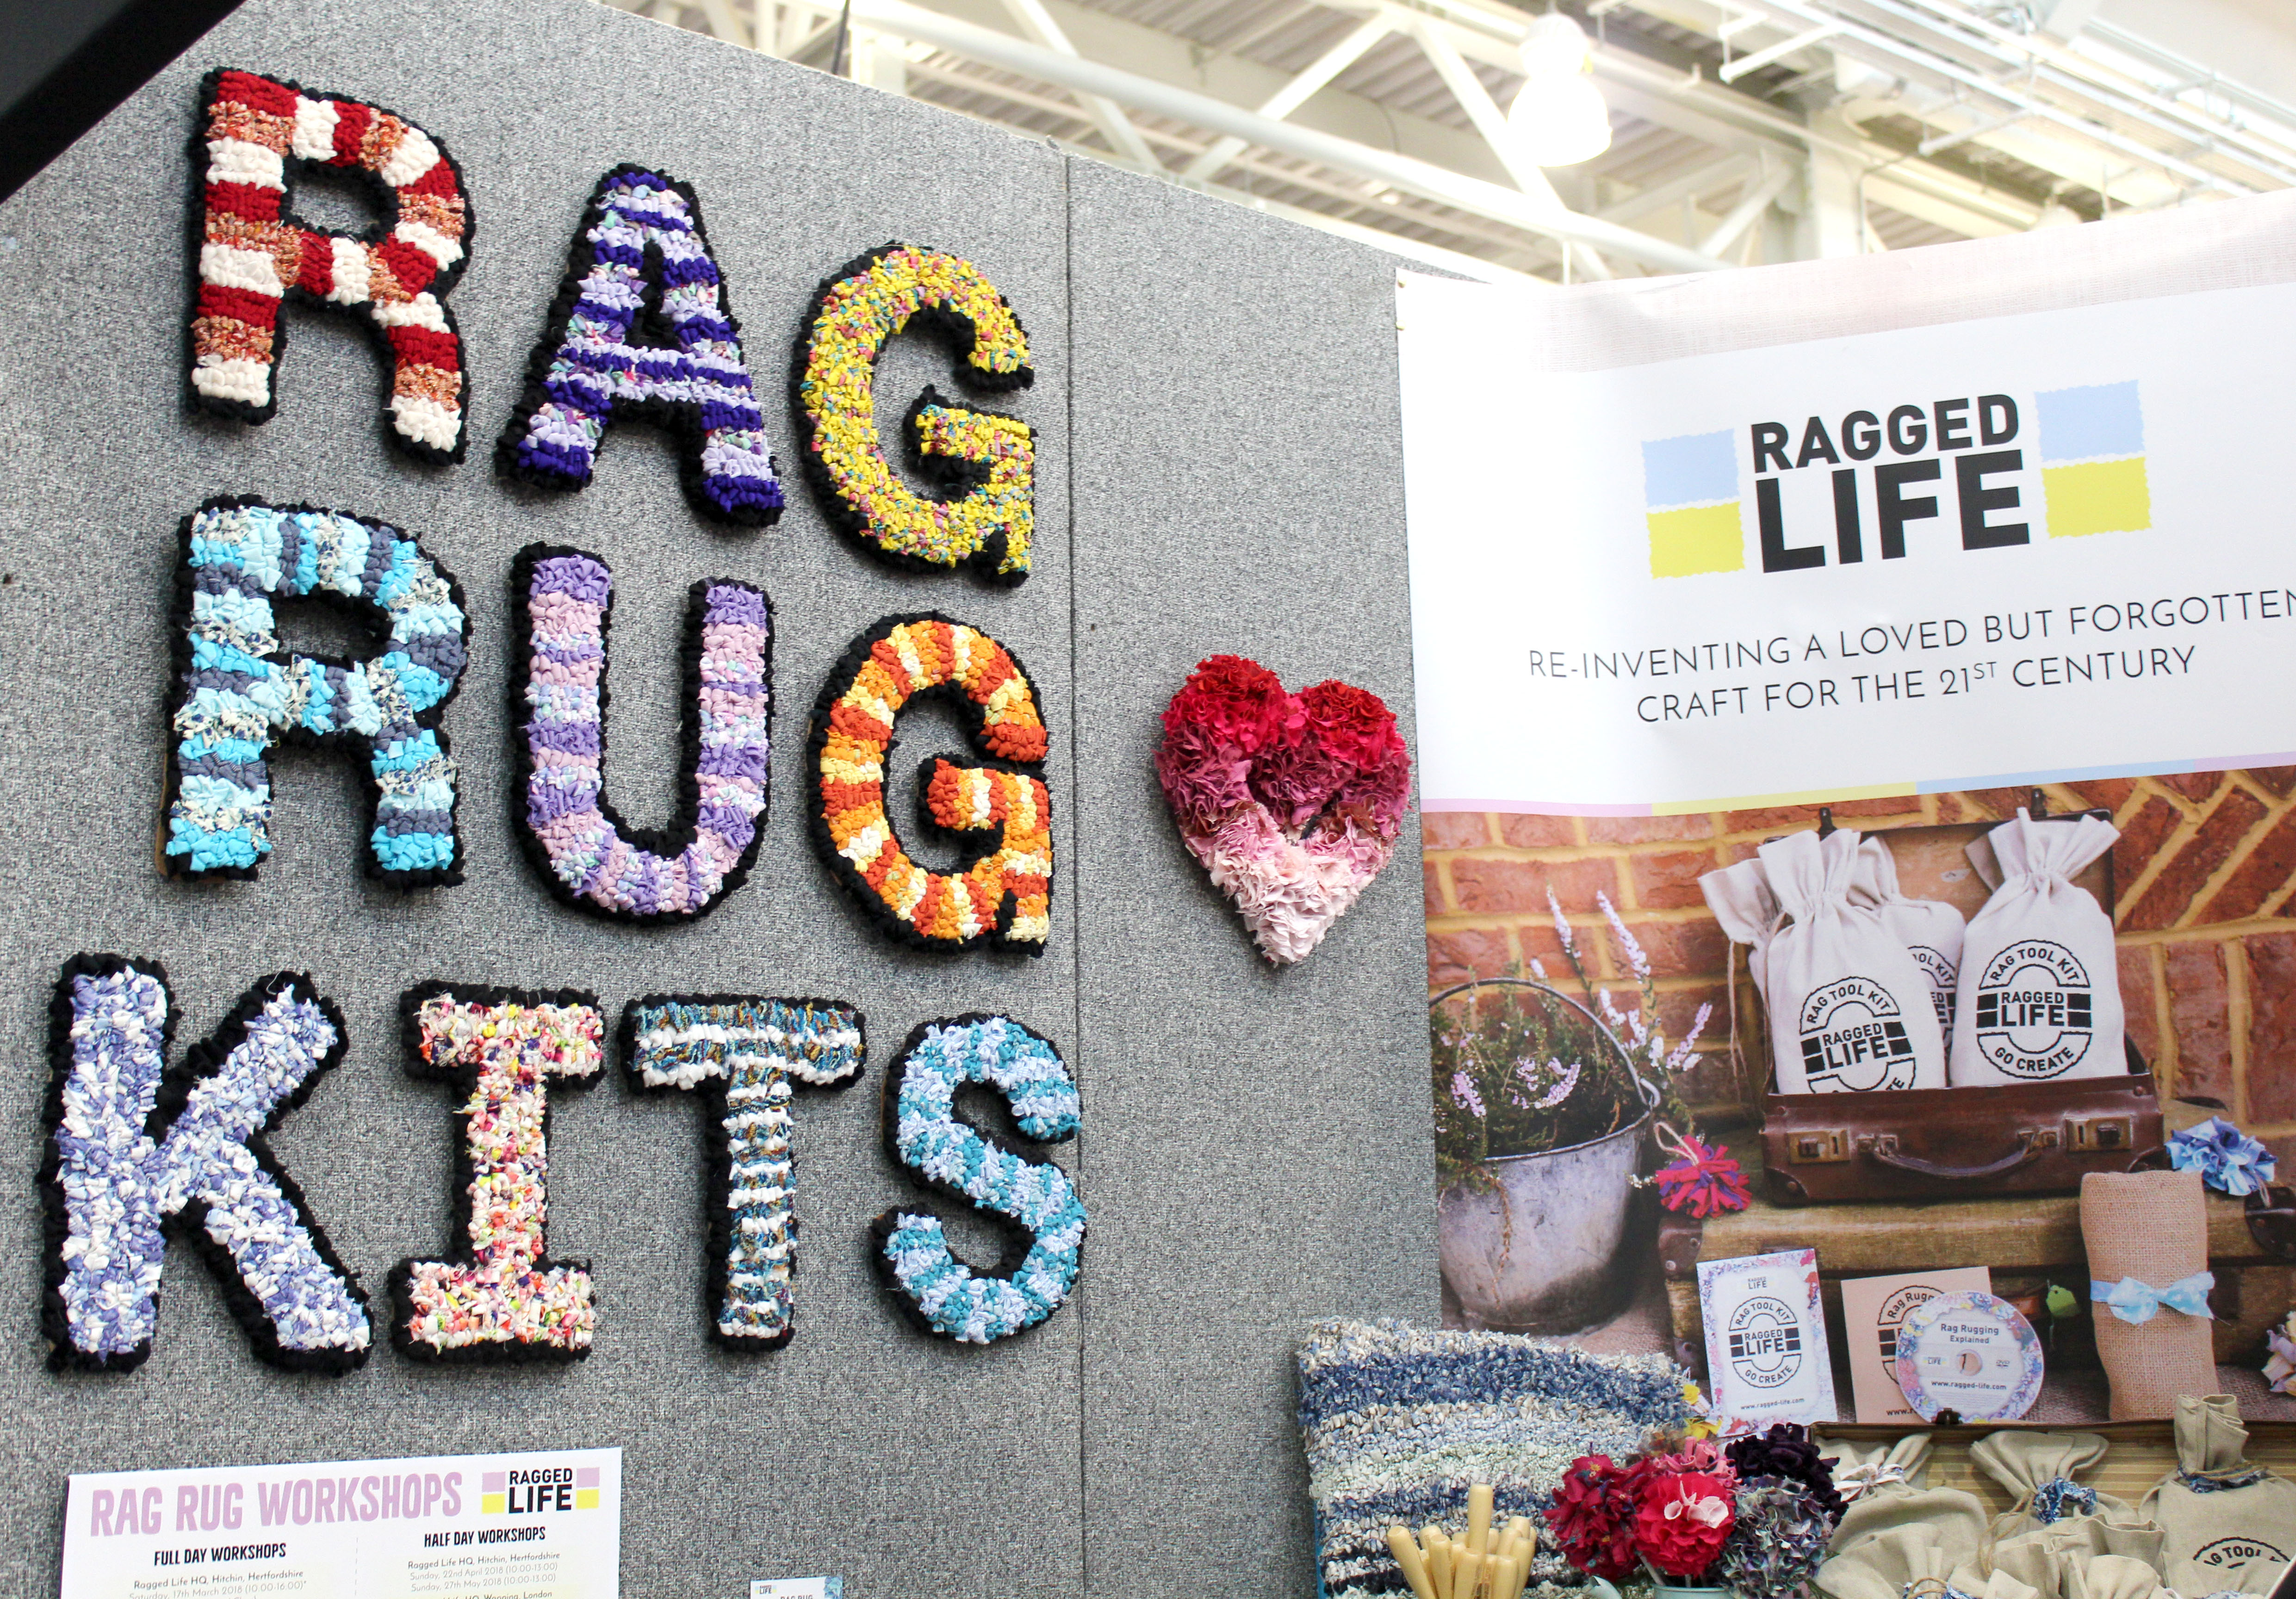 Ragged Life Stand at the Knitting and Stitching Show in Olympia London